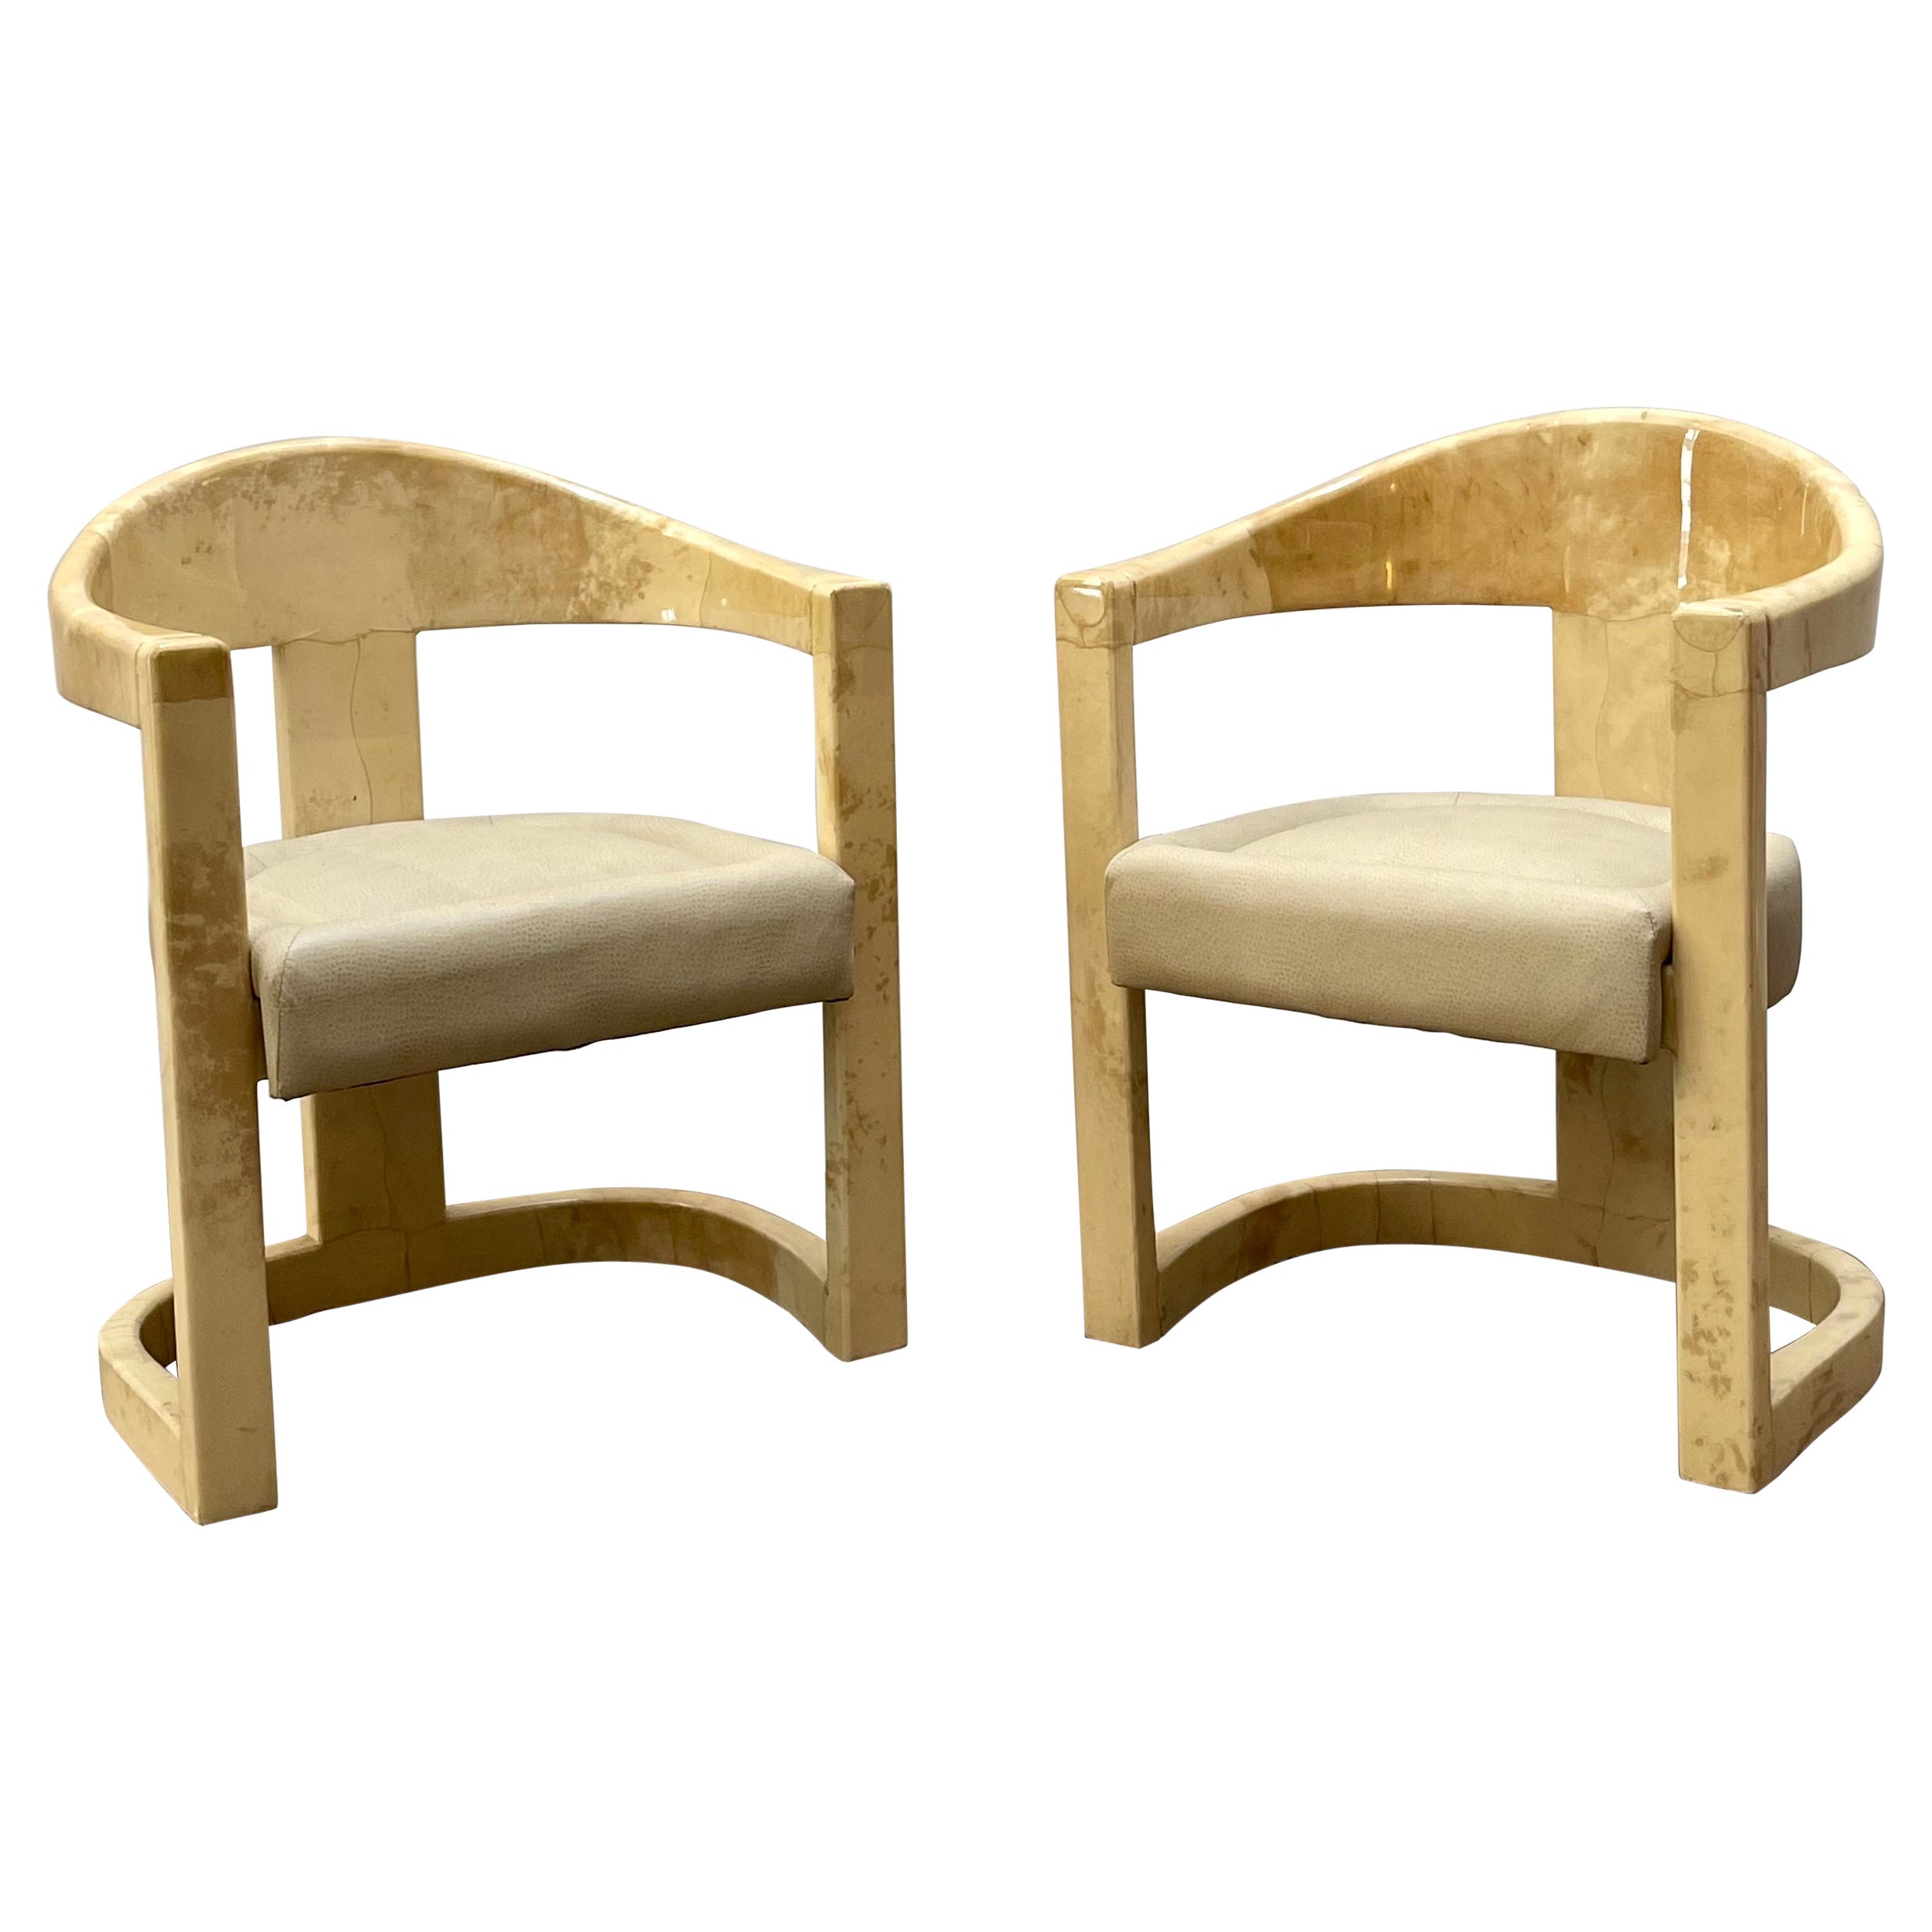 Karl Springer Pair of "Onassis Chairs" in Lacquered Goatskin, 1970s